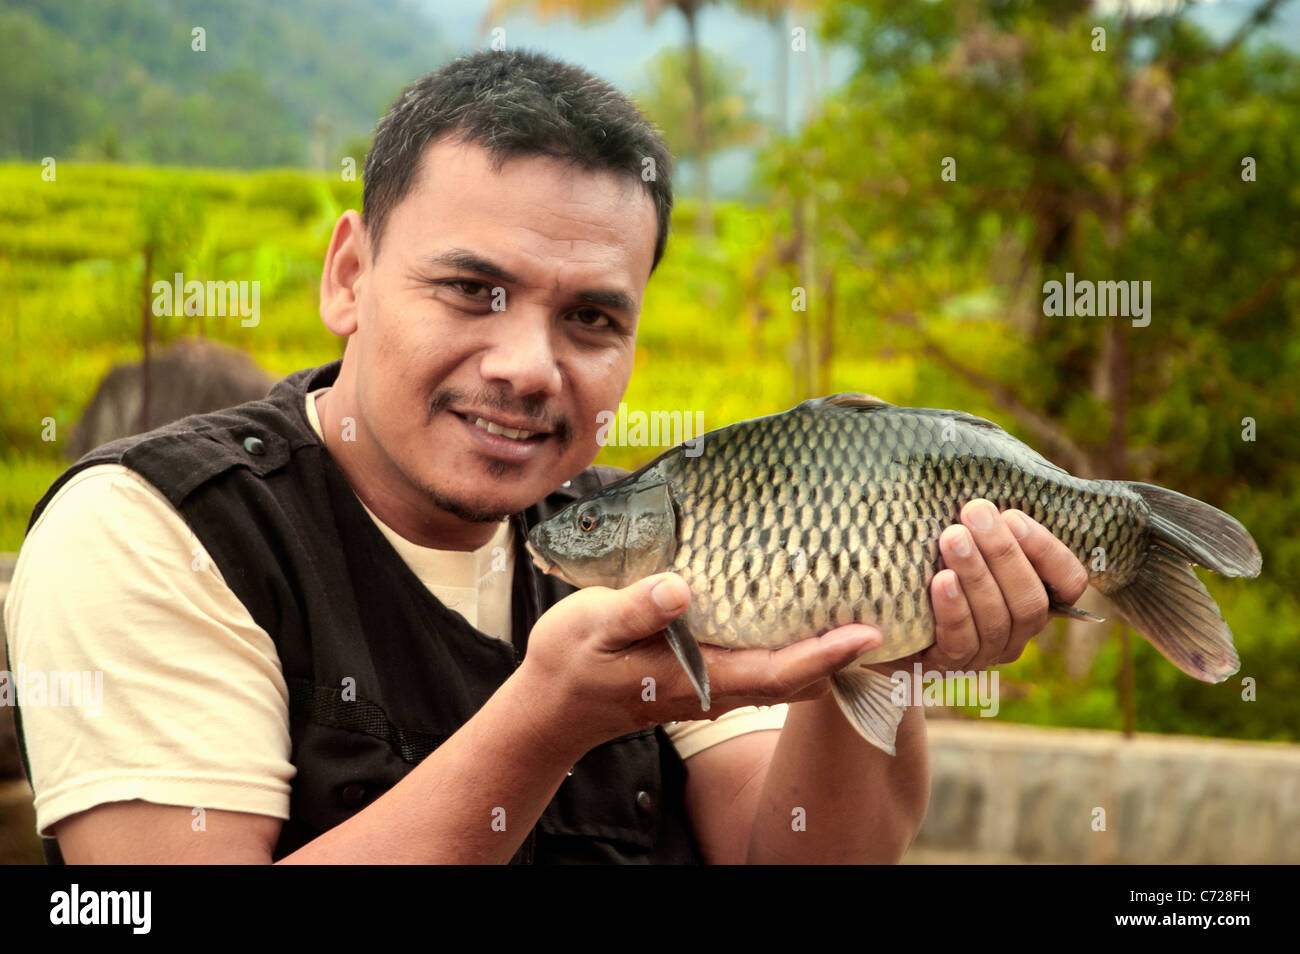 A Fisherman with the Common Carp Fish Stock Photo